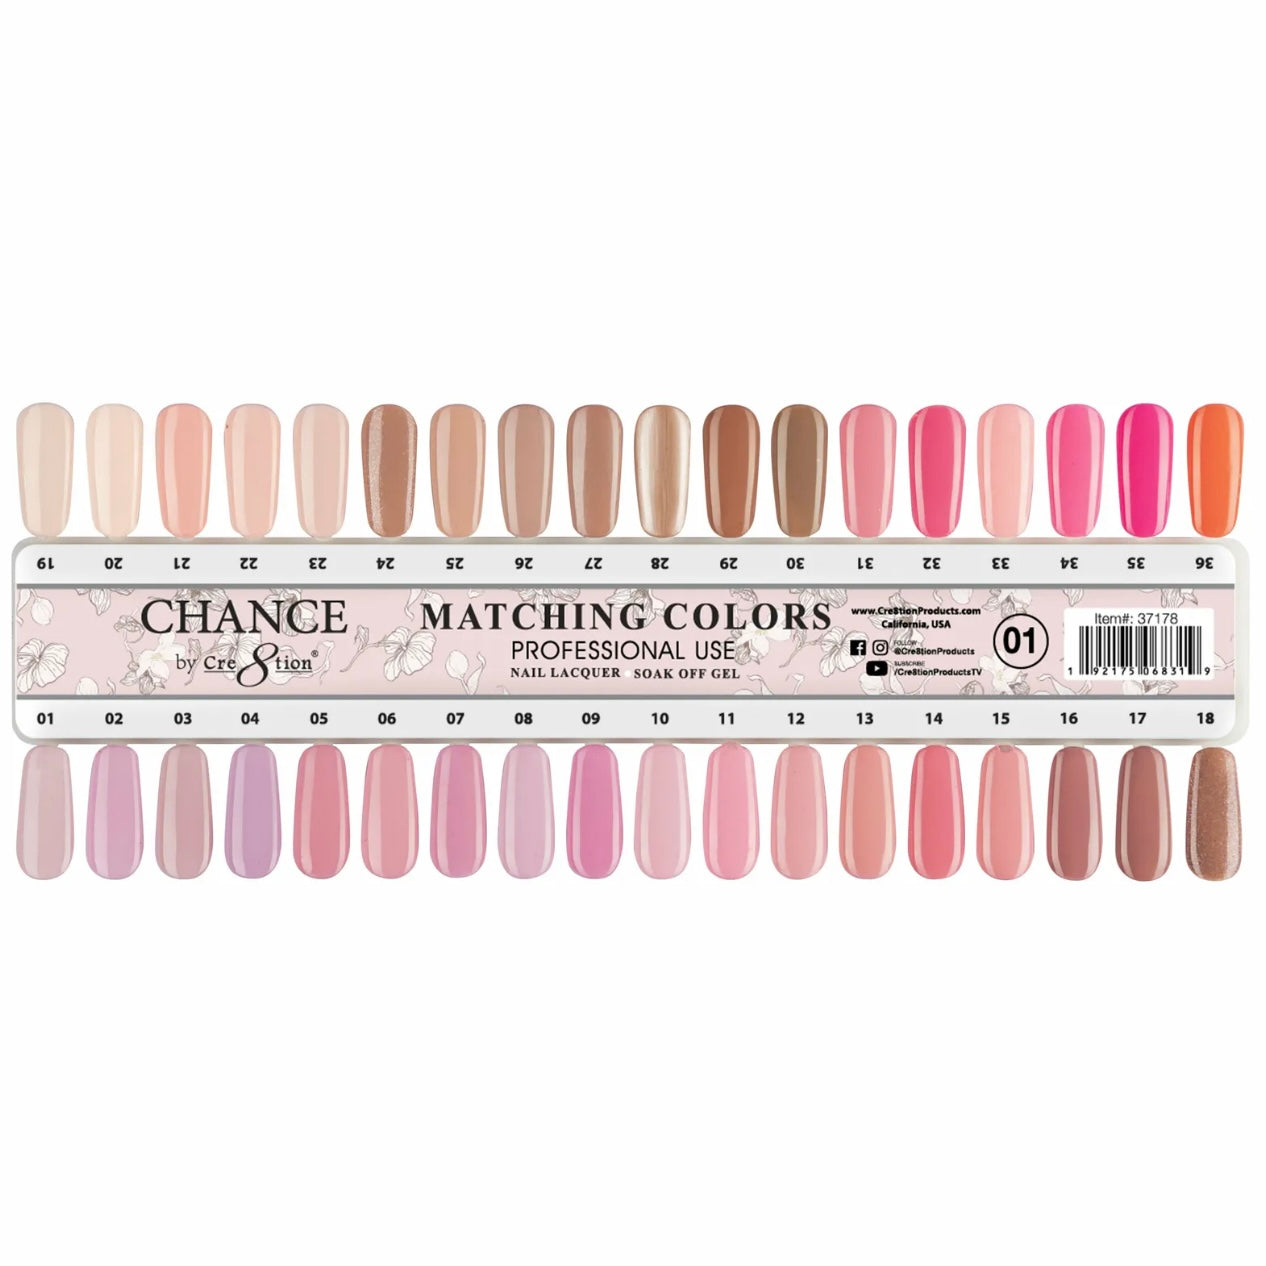 Cre8tion Chance Gel / Lacquer Duo Colors Set #1 (Nude & Soft Shades) # 1 - 36